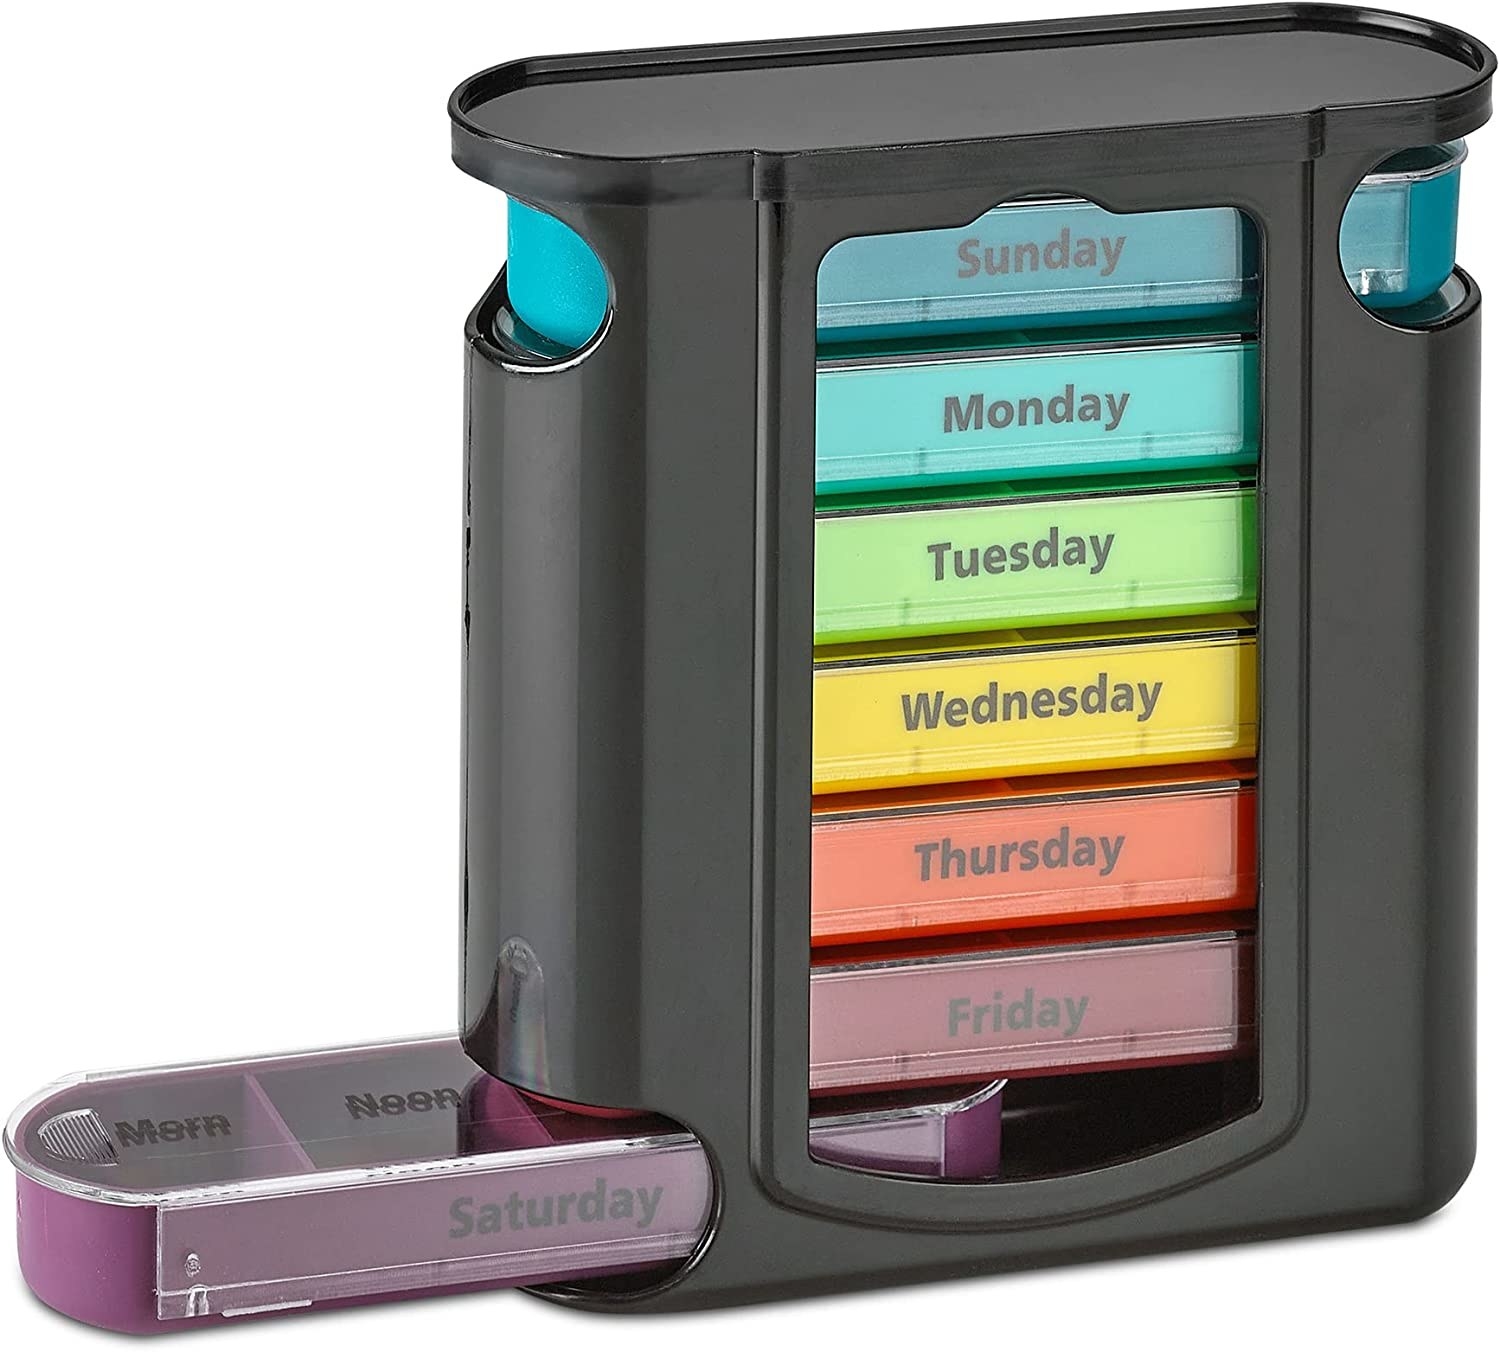 The pill organizer on a blank background